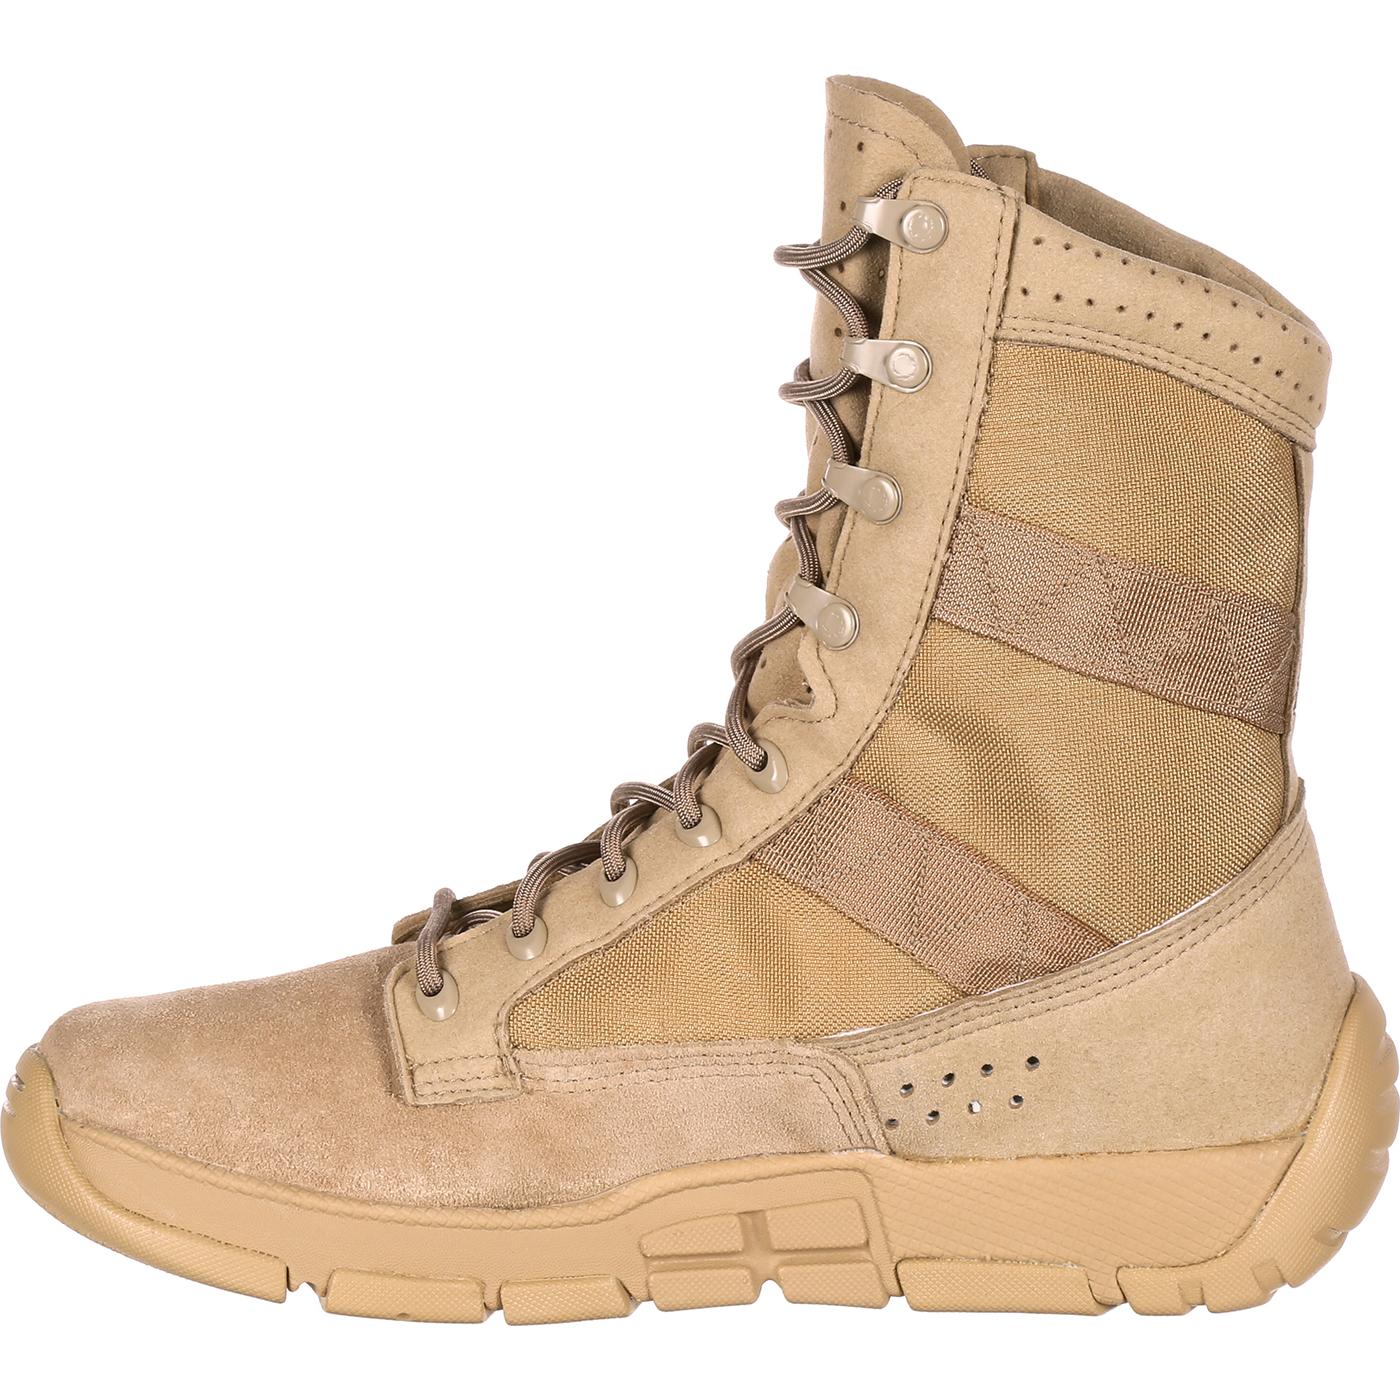 Rocky Military Boots - C4T Trainer; Tactical Military Boot | Army Boot